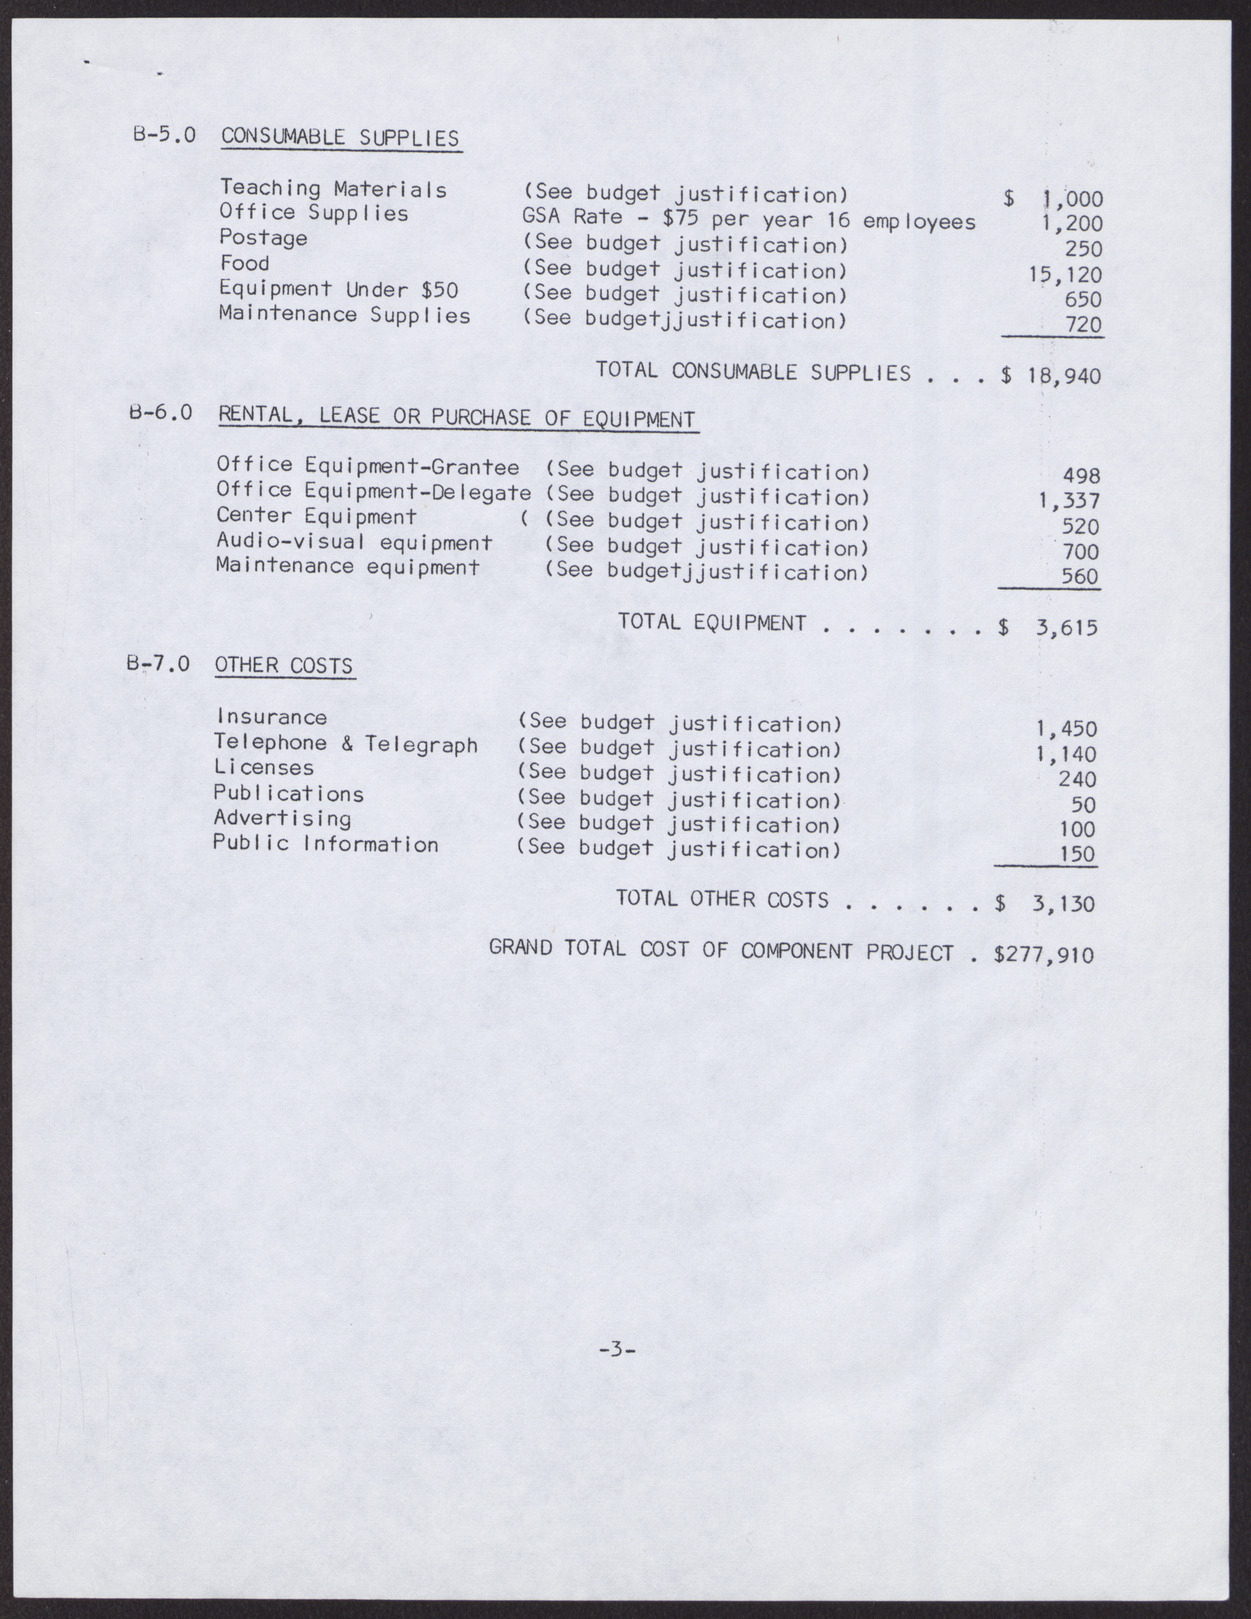 Day Care Center Project Budget for Component Project and Budget Justification and Explanation (13 pages), no date, page 3